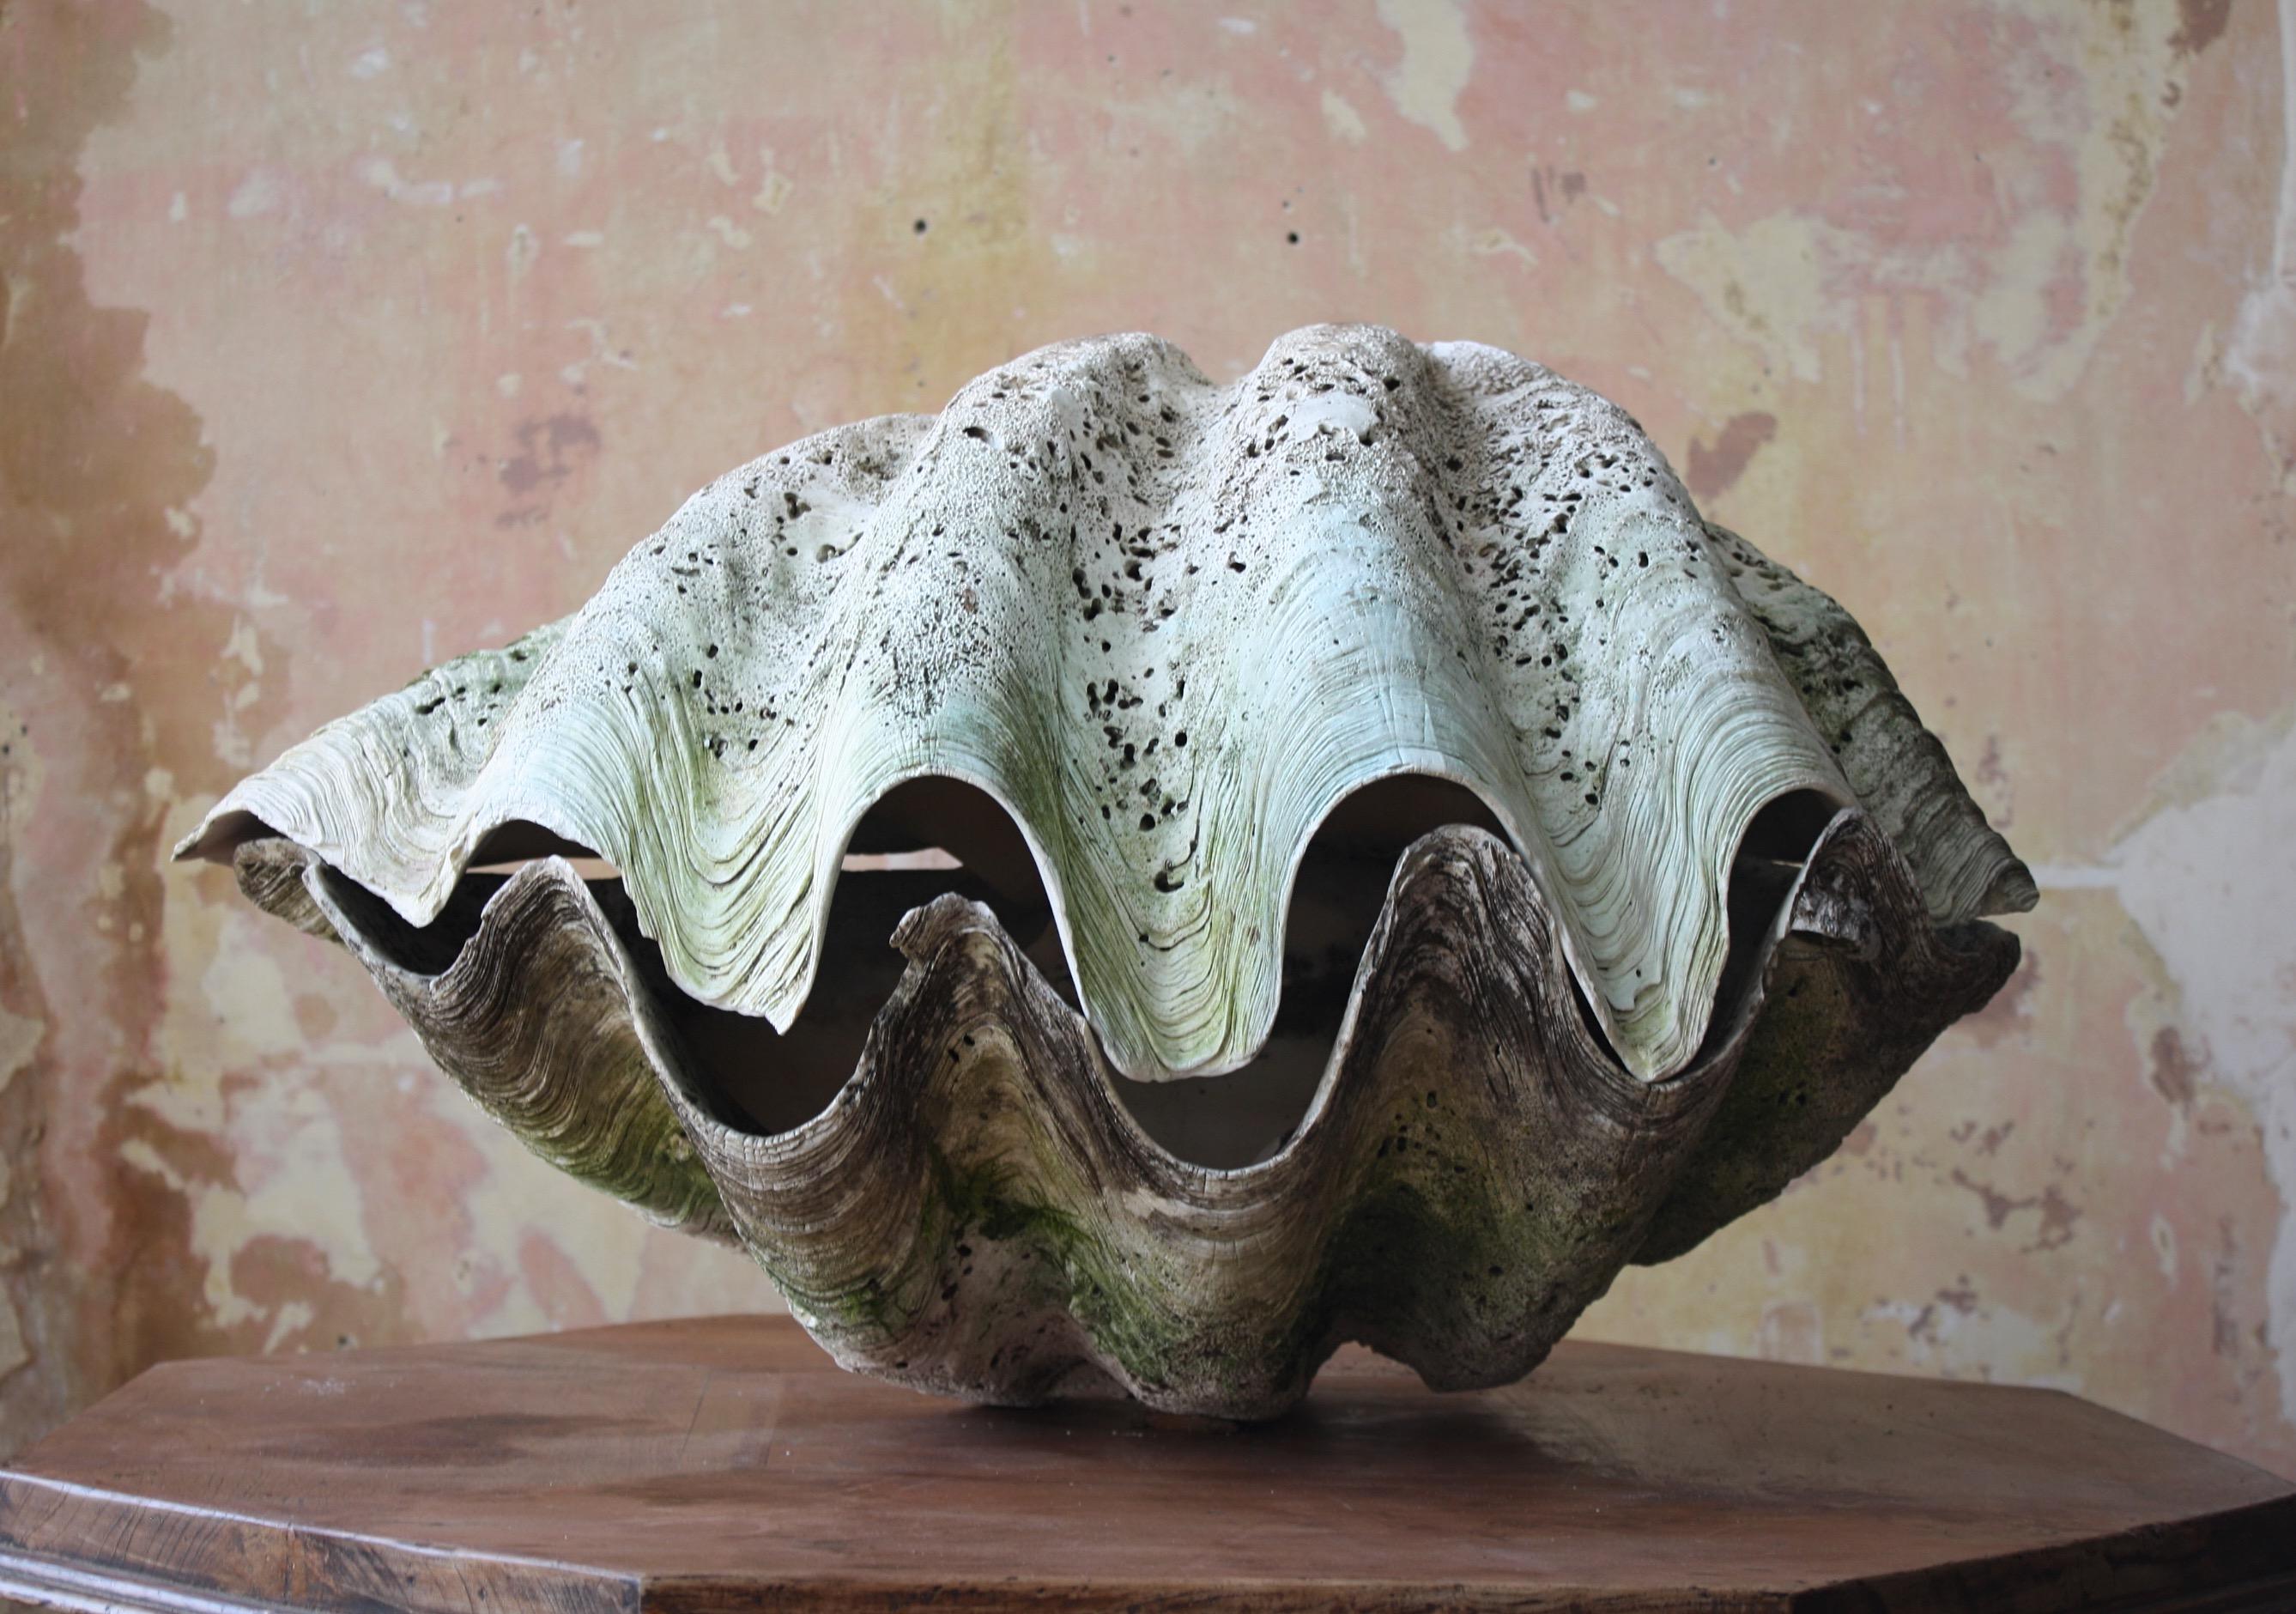 An extra large and untouched tridacna gigas (a giant clam shell) in country house condition. It would appear the shell has spent a large part of its land life in the elements thus giving the piece a wonderful texture and a delicate green/blue